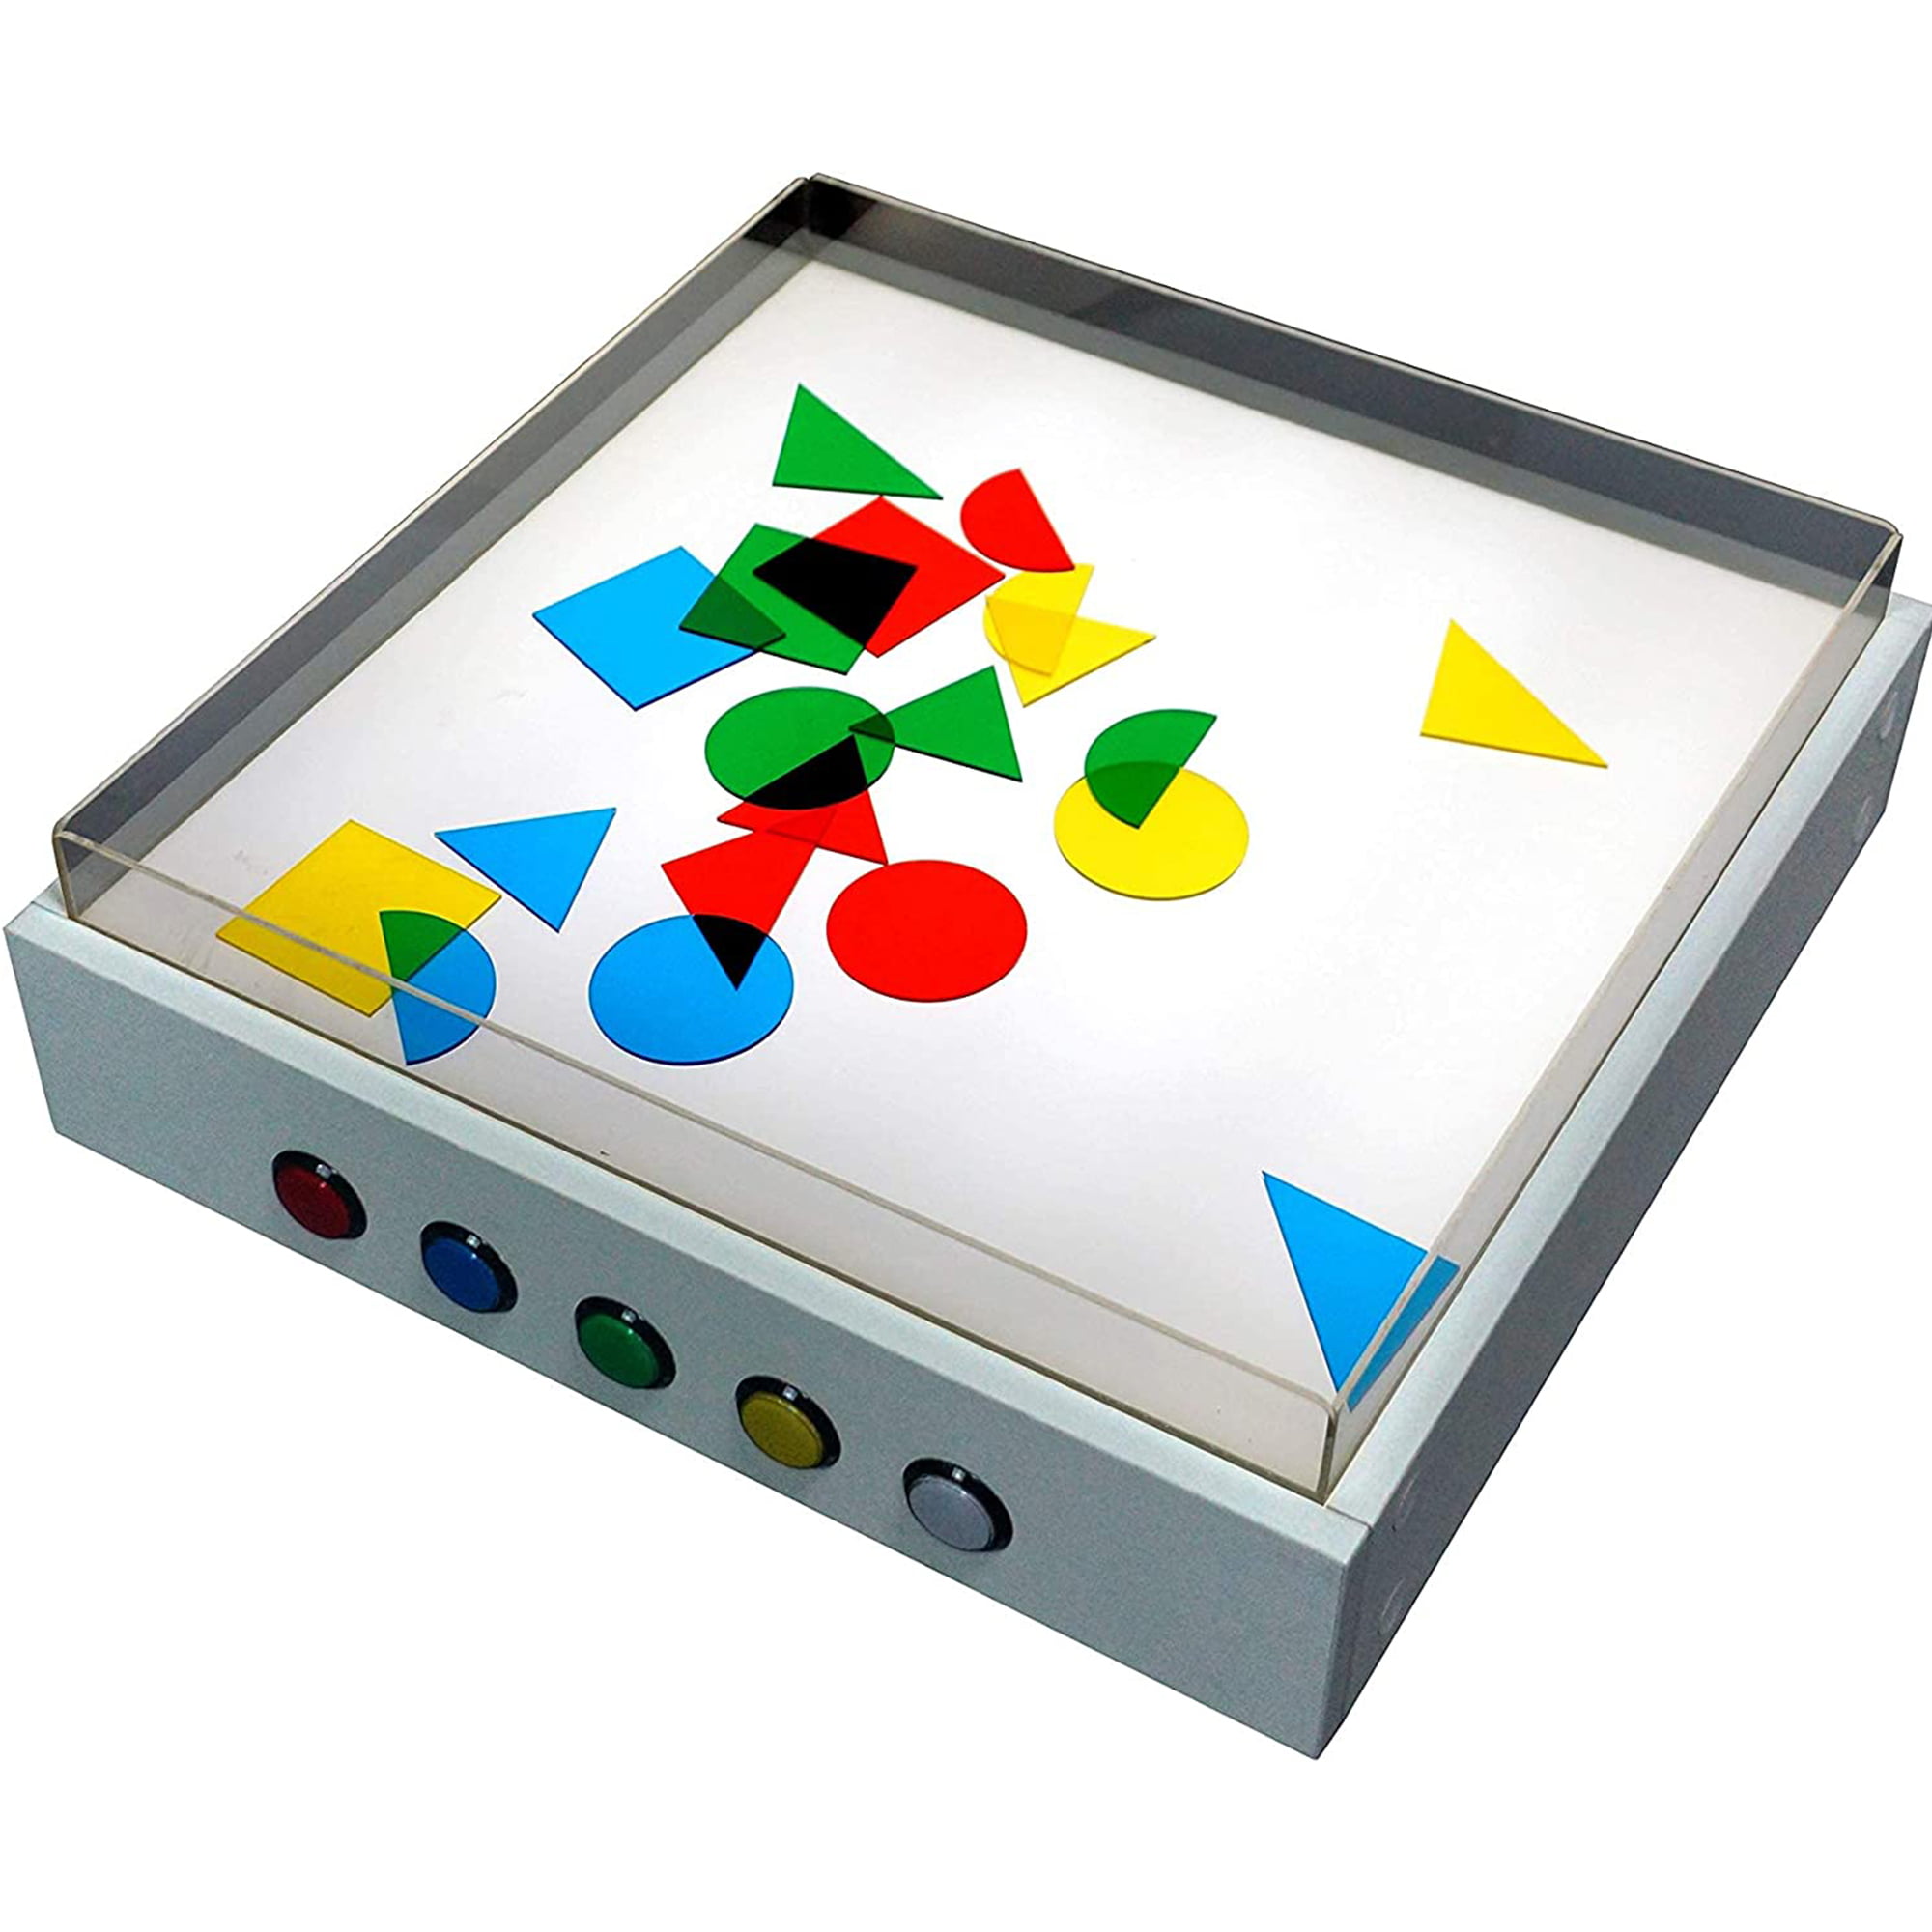 Beright Sensory Table 2 Pieces Light Table Lid / Beright Table Lid / Light  Table / Acrylic Table Top / Light Box / Acrylic Lid / Beright Lid 